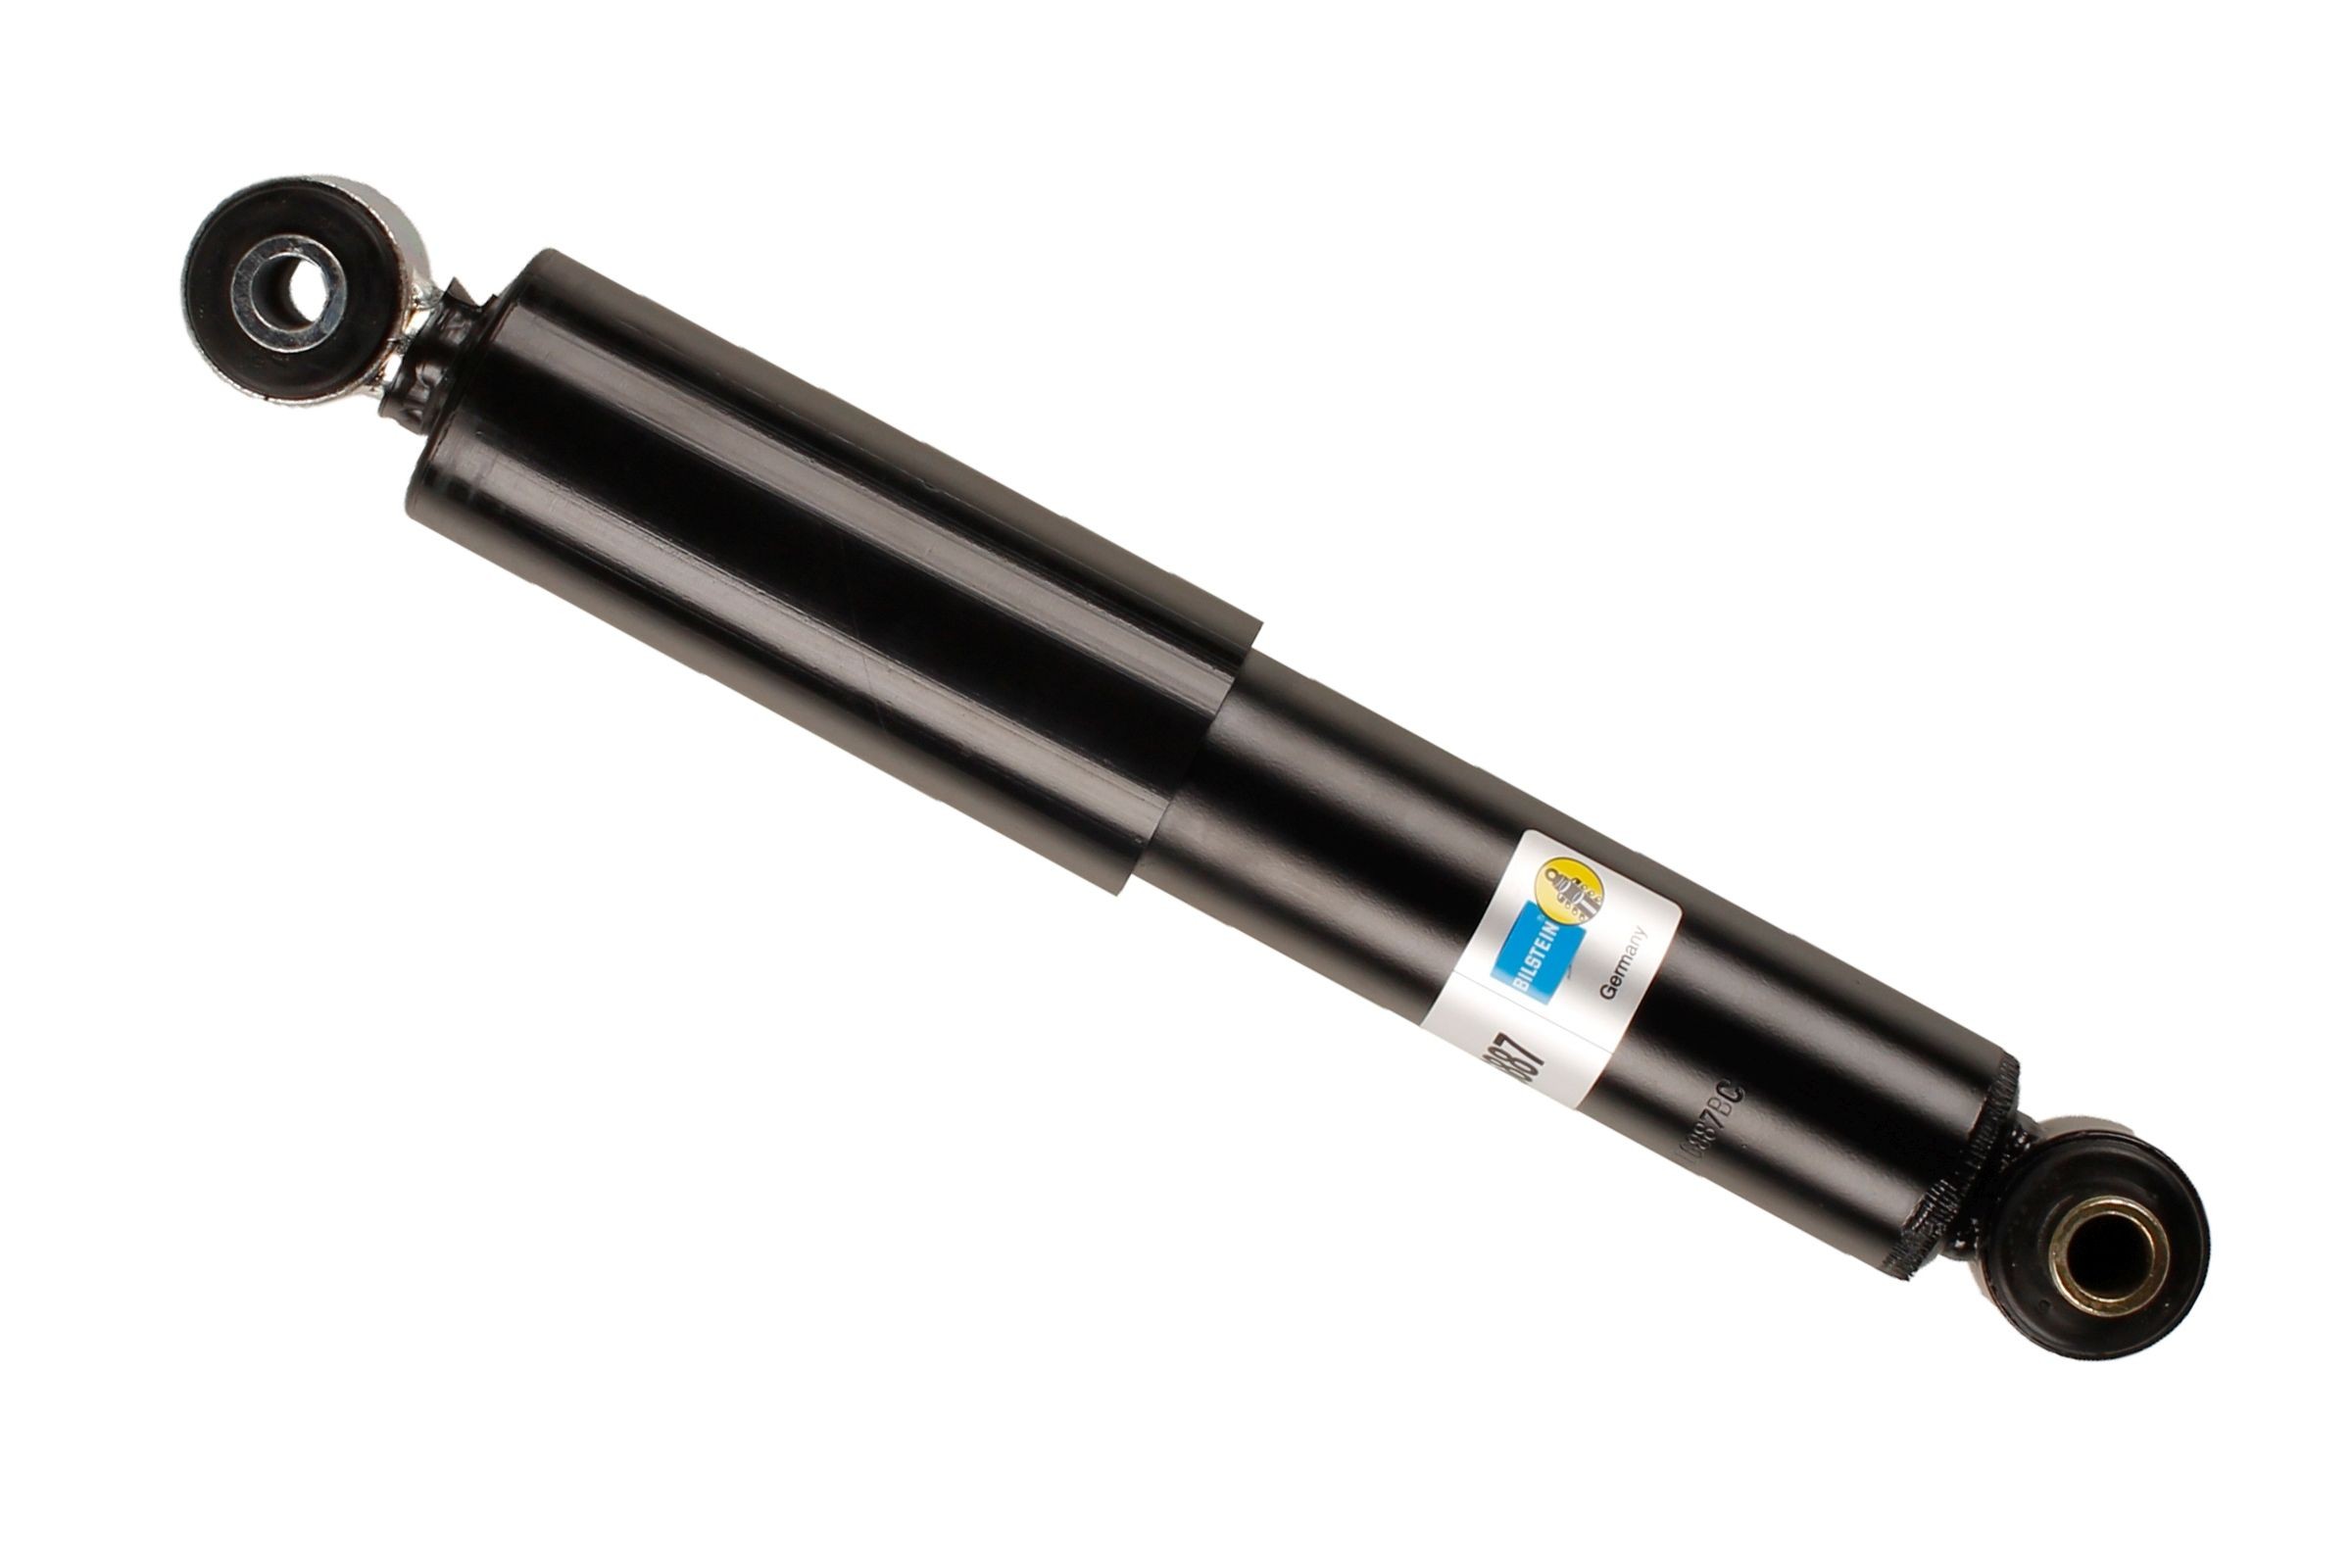 BILSTEIN - B4 OE Replacement 19-068879 Shock absorber Rear Axle, Gas Pressure, Twin-Tube, Absorber does not carry a spring, Top eye, Bottom eye